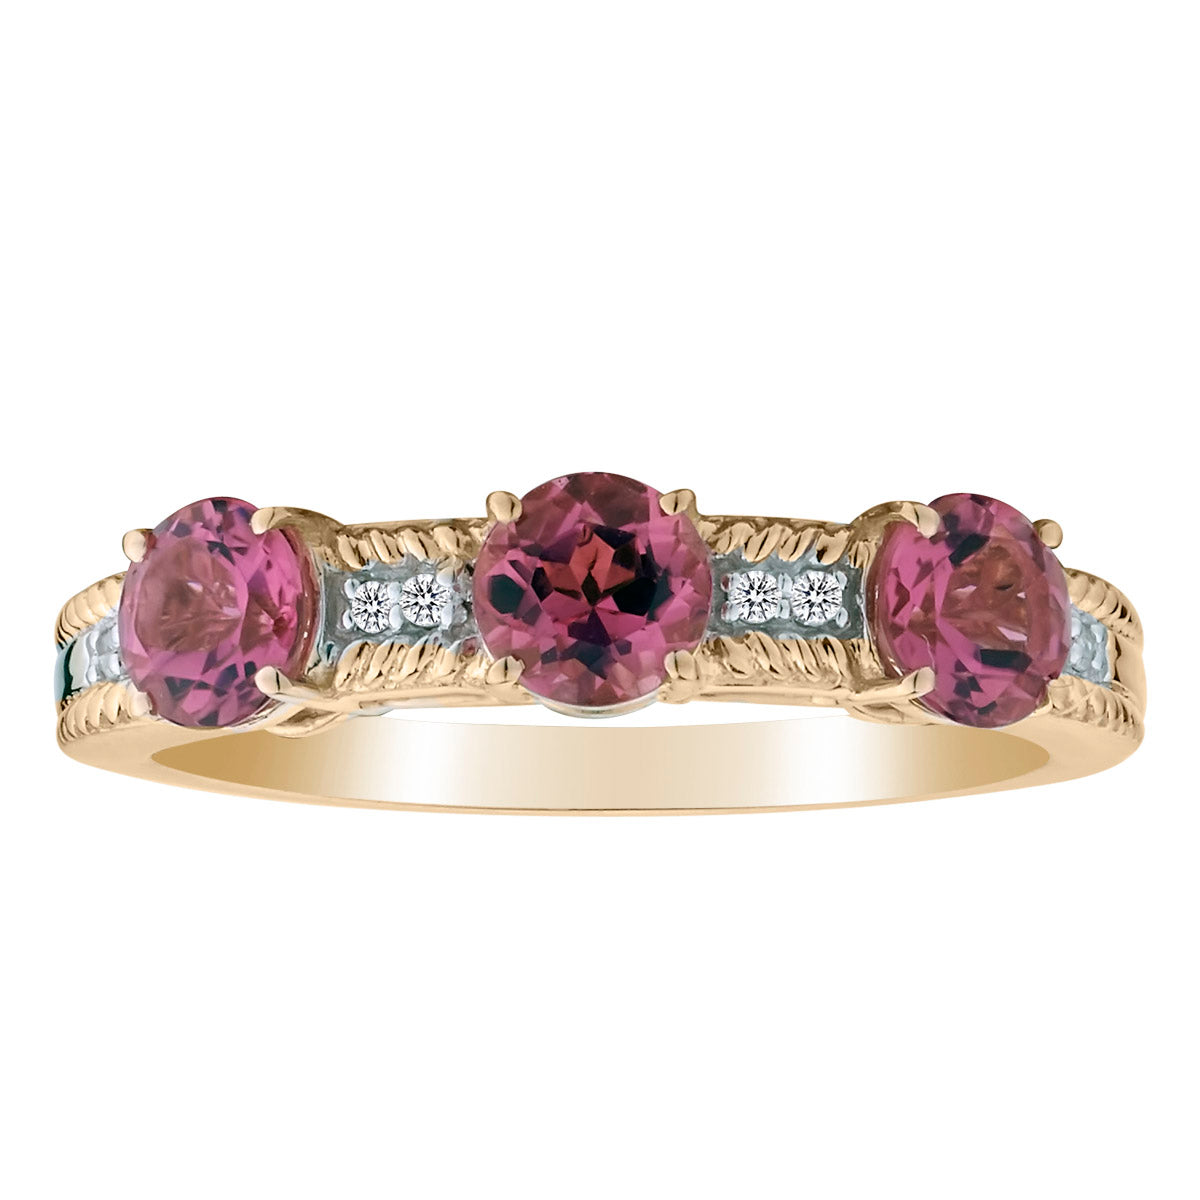 1.25 Genuine Pink Tourmaline "Past, Present, Future" Ring, 14kt Yellow Gold.......................NOW